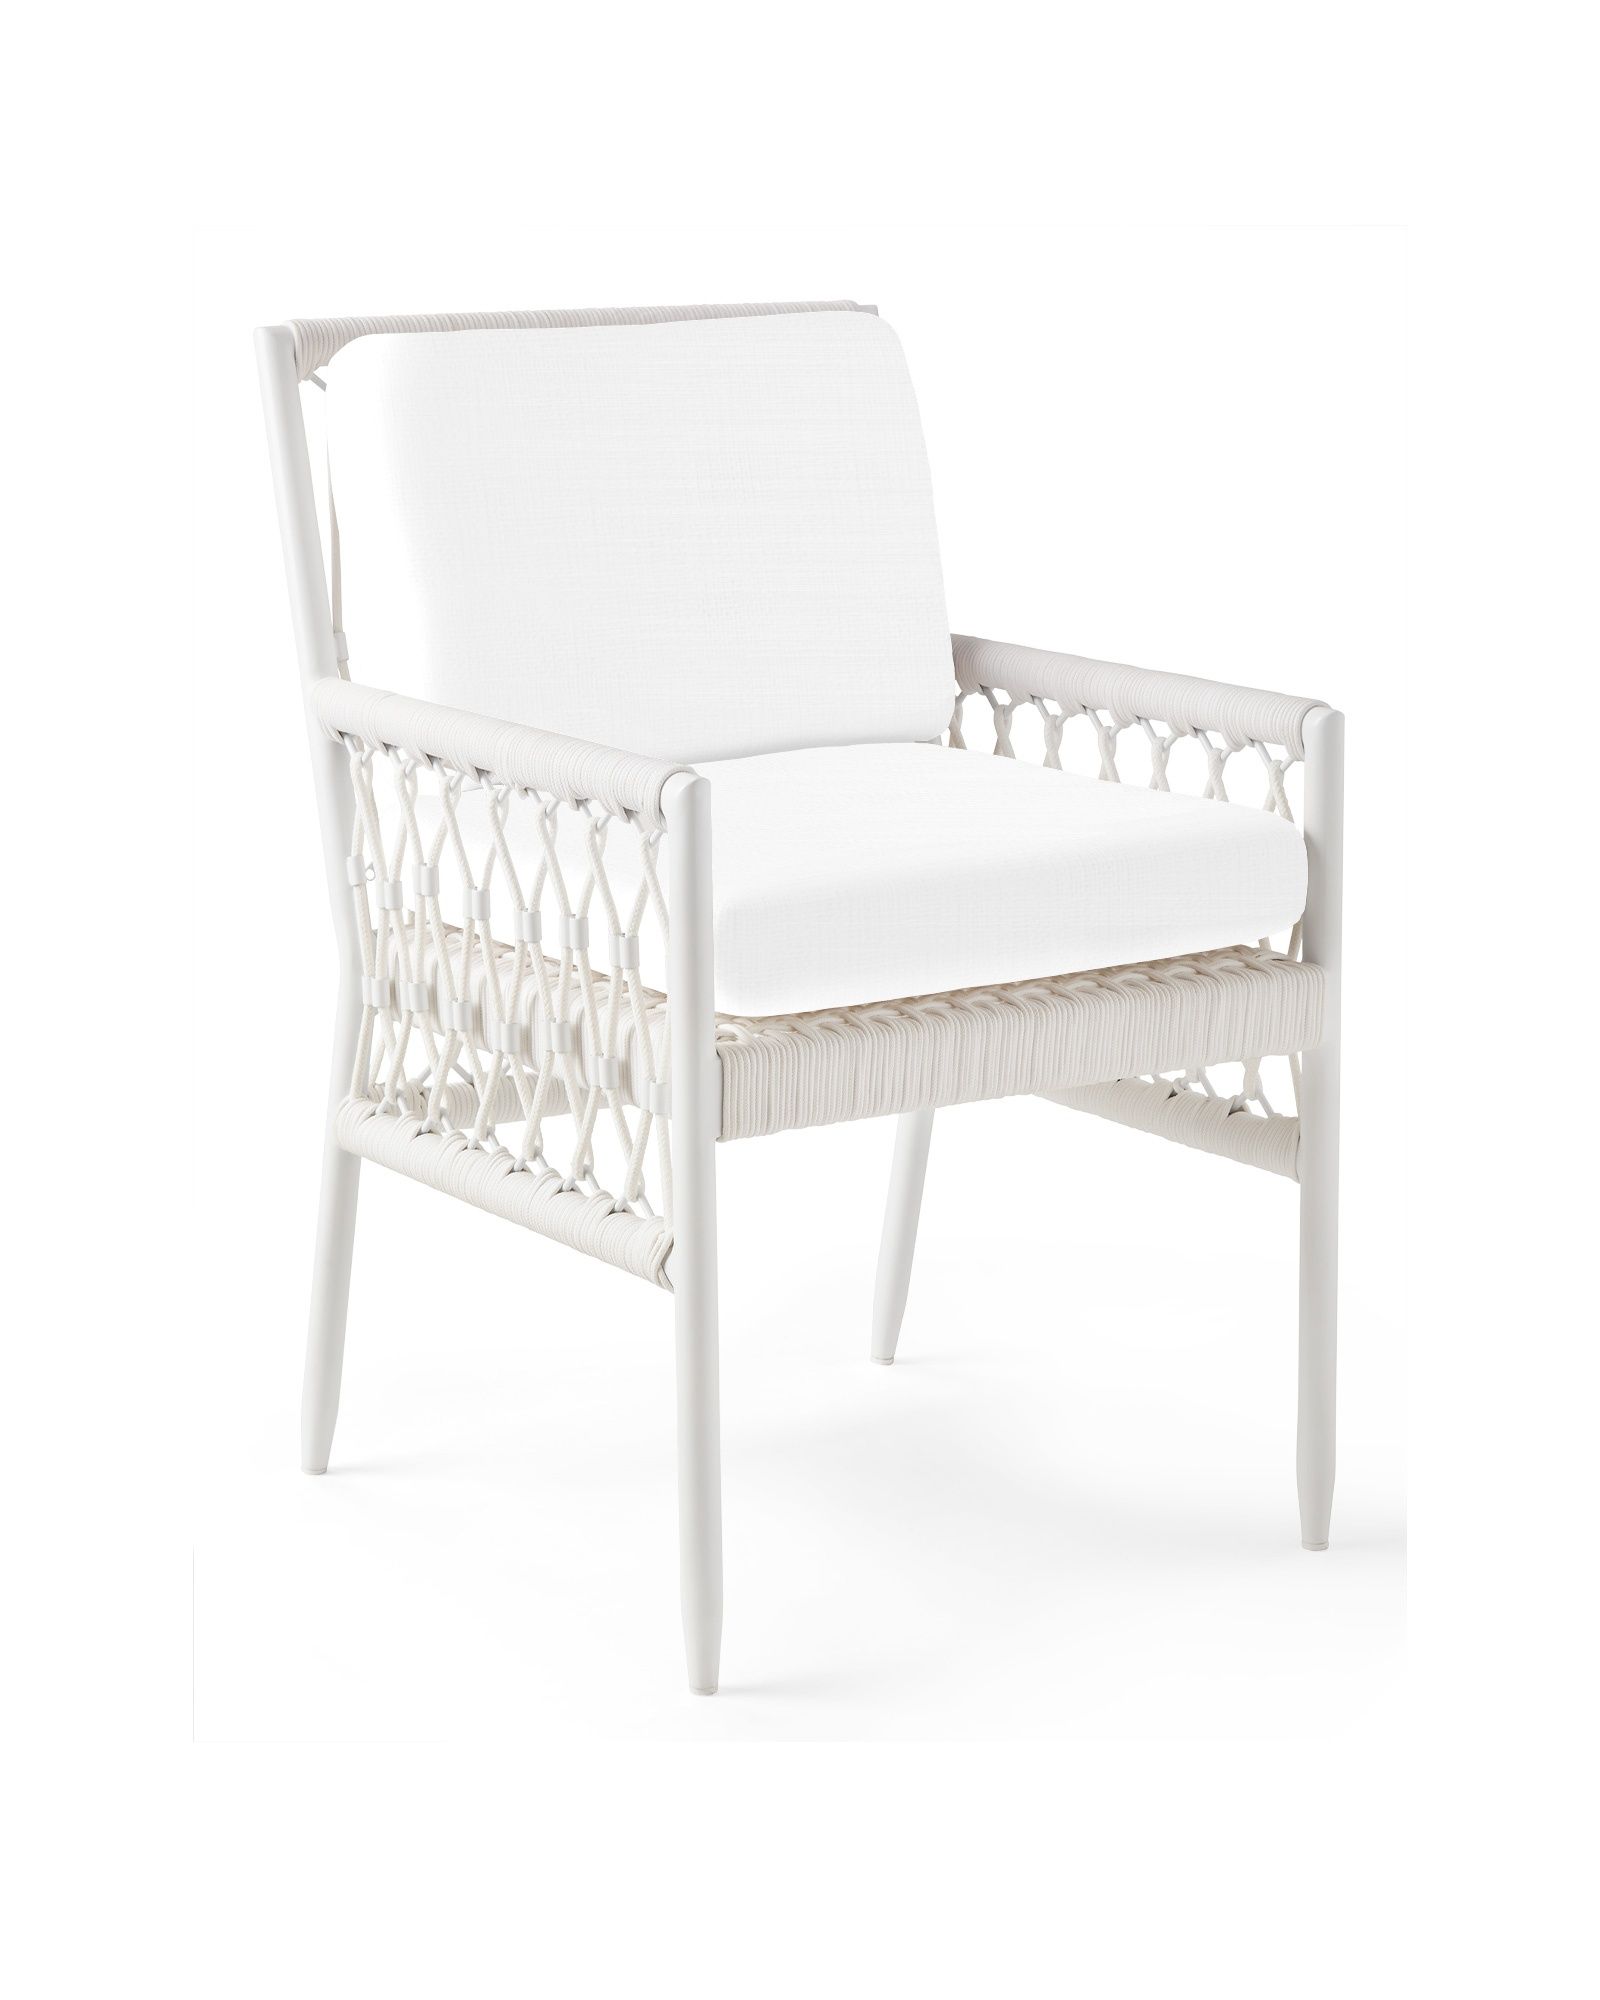 Salt Creek Dining Chair - White | Serena and Lily